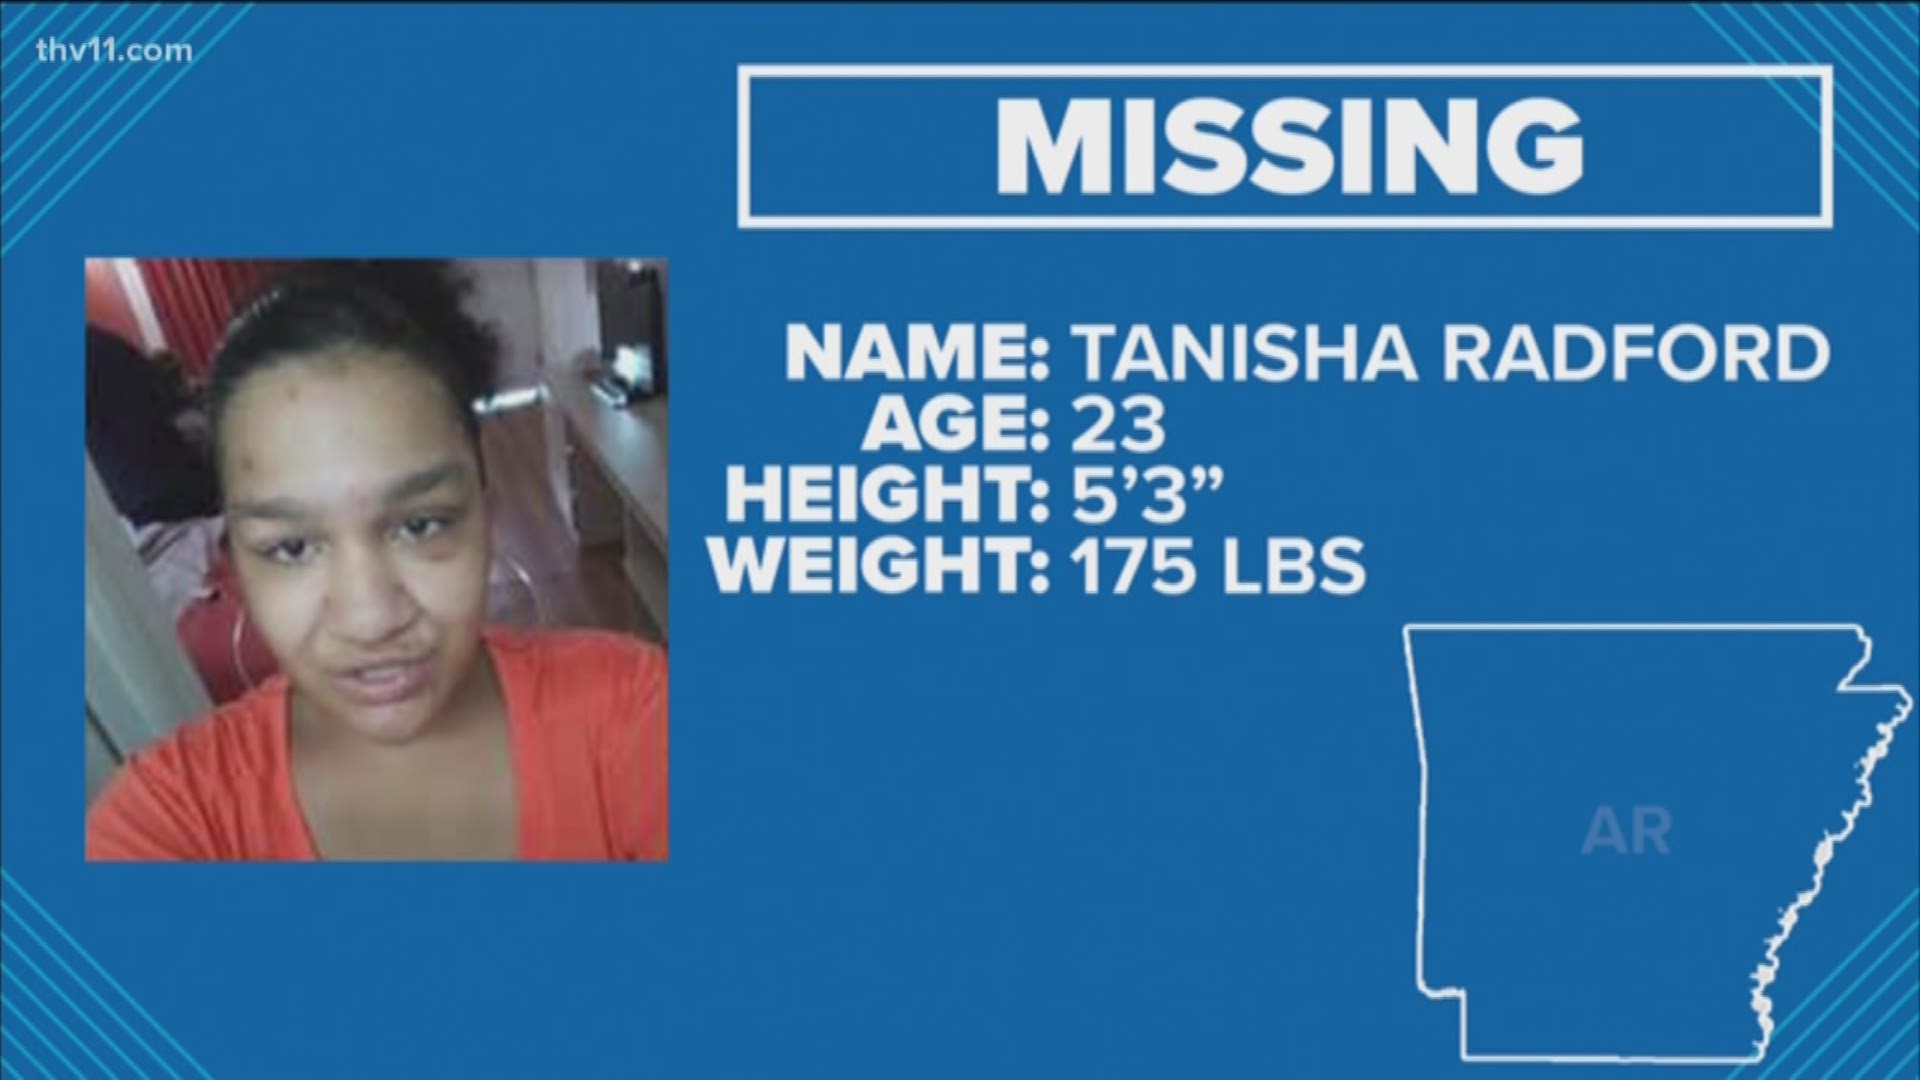 Little Rock police are searching for a missing homeless woman this morning.